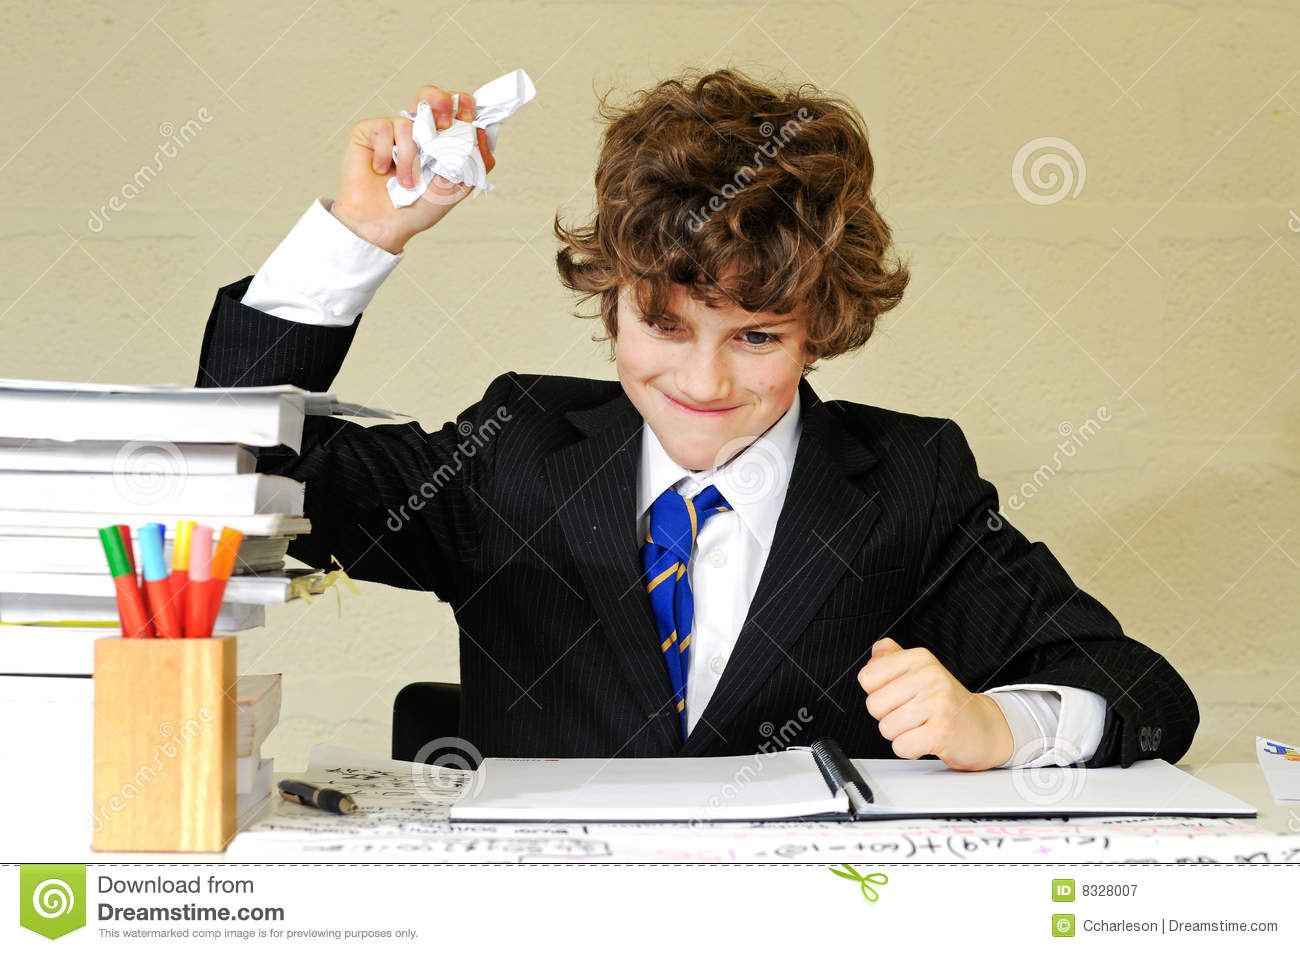 Boy Frustrated With School Work Royalty Free Stock Photography   Image